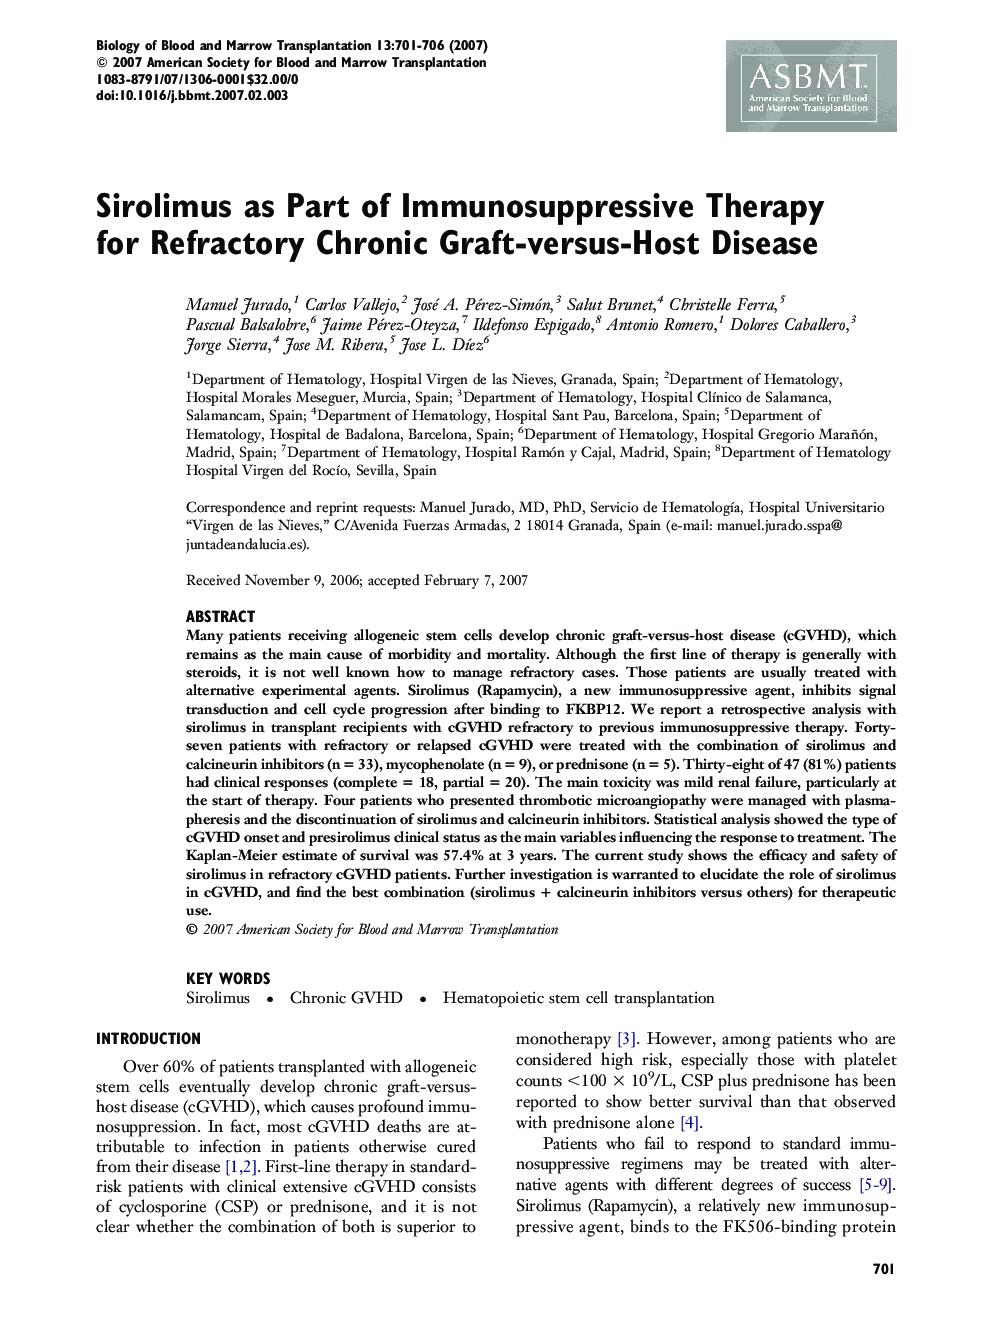 Sirolimus as Part of Immunosuppressive Therapy for Refractory Chronic Graft-versus-Host Disease